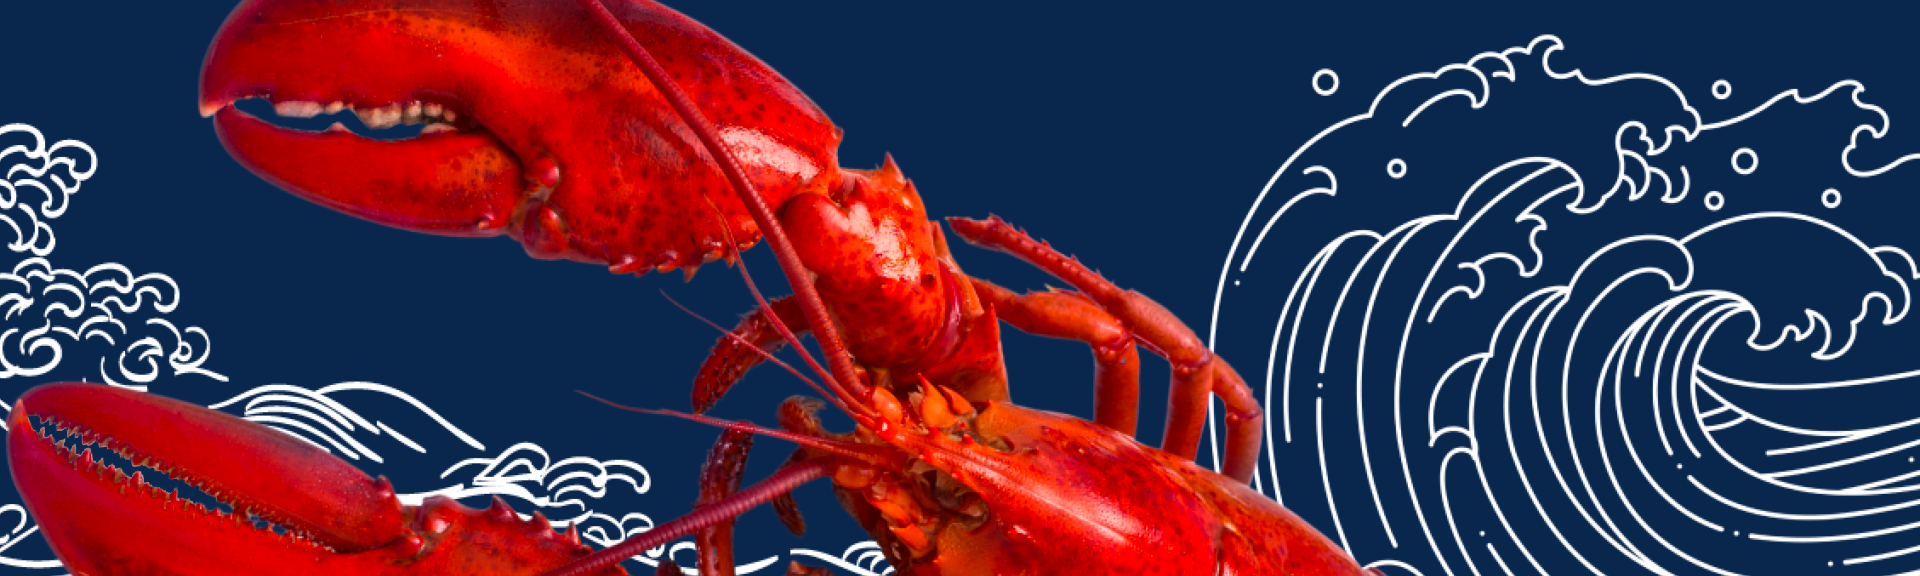 Selecting (And Buying) Maine Lobster recipe image